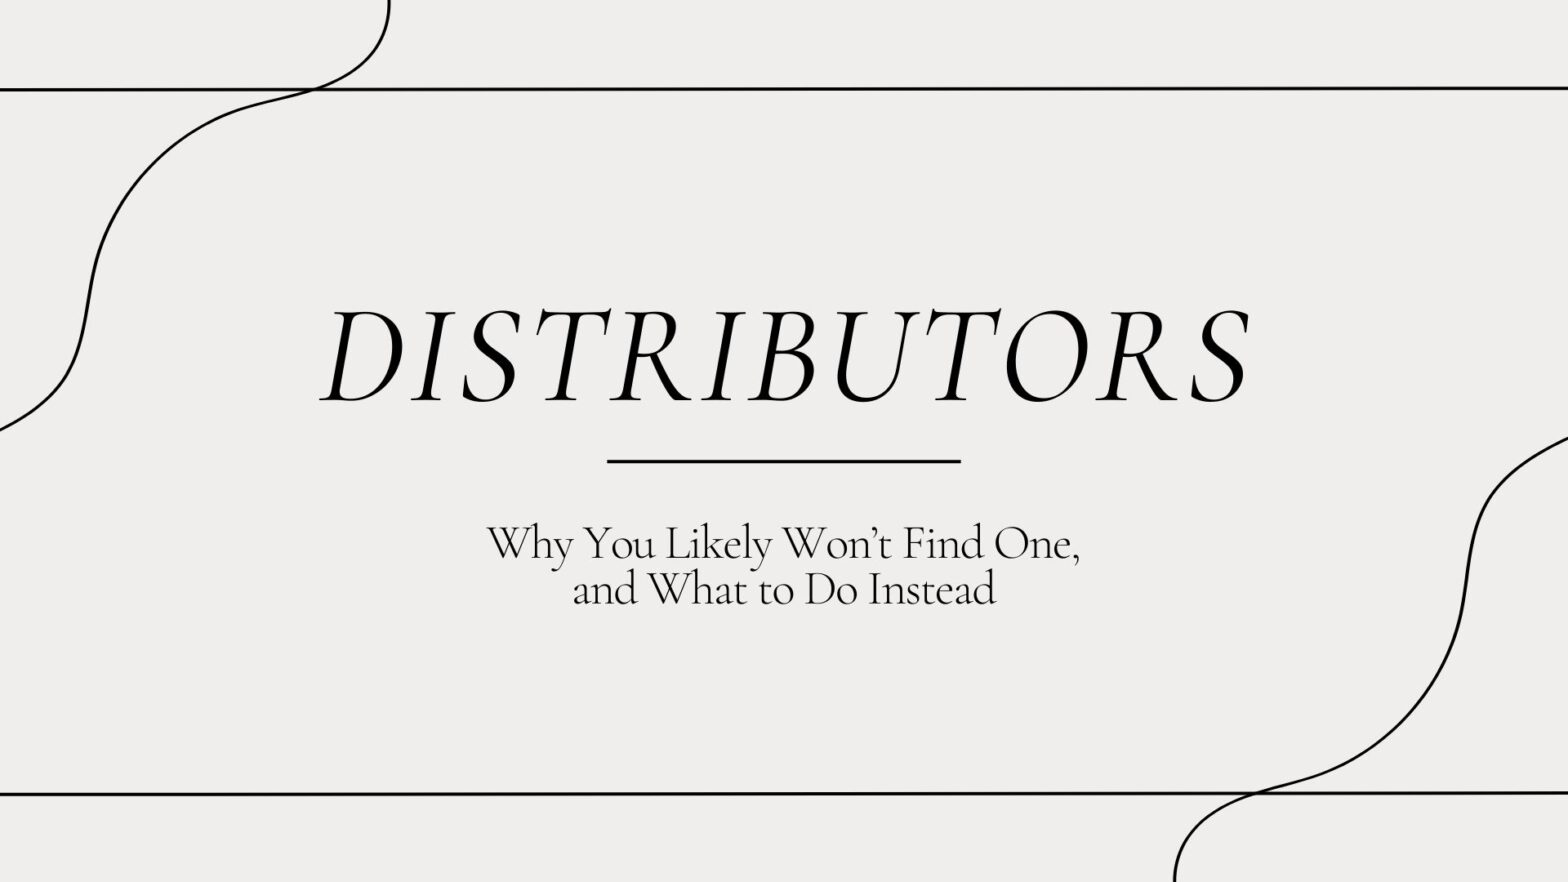 Distributors - why you likely won't find one, and what to do instead